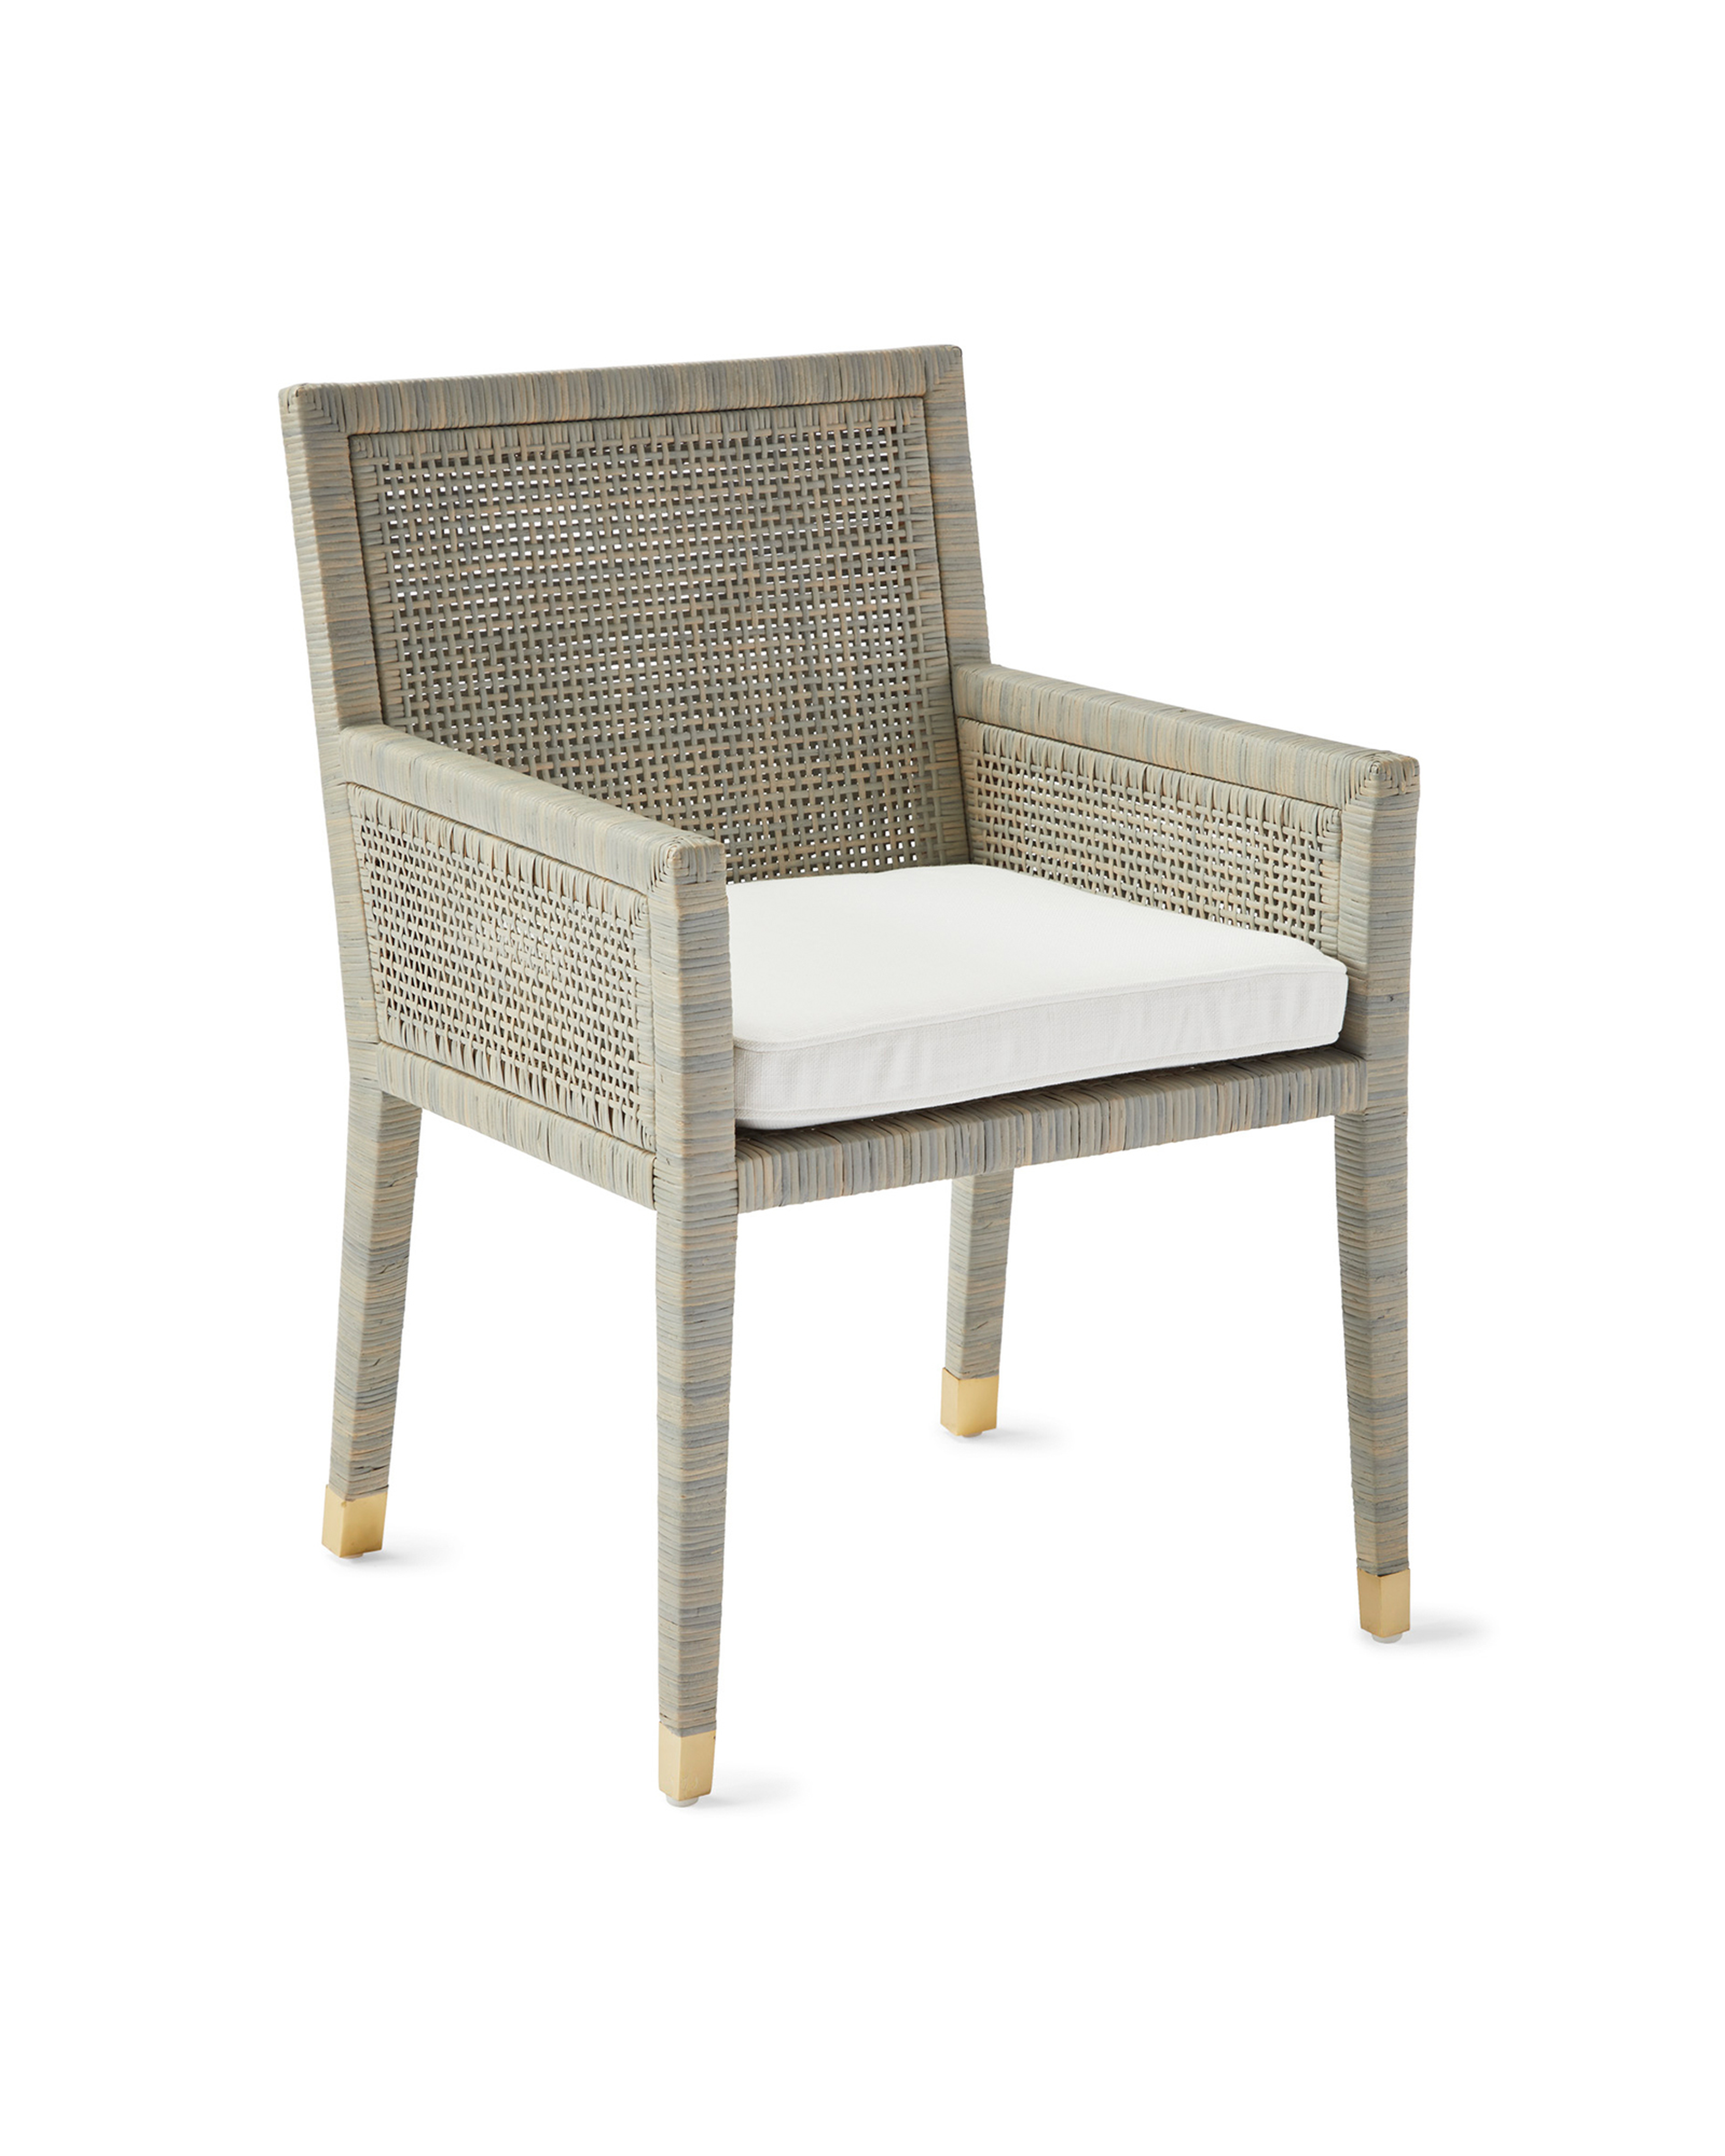 Balboa Armchair - Mist - Serena and Lily